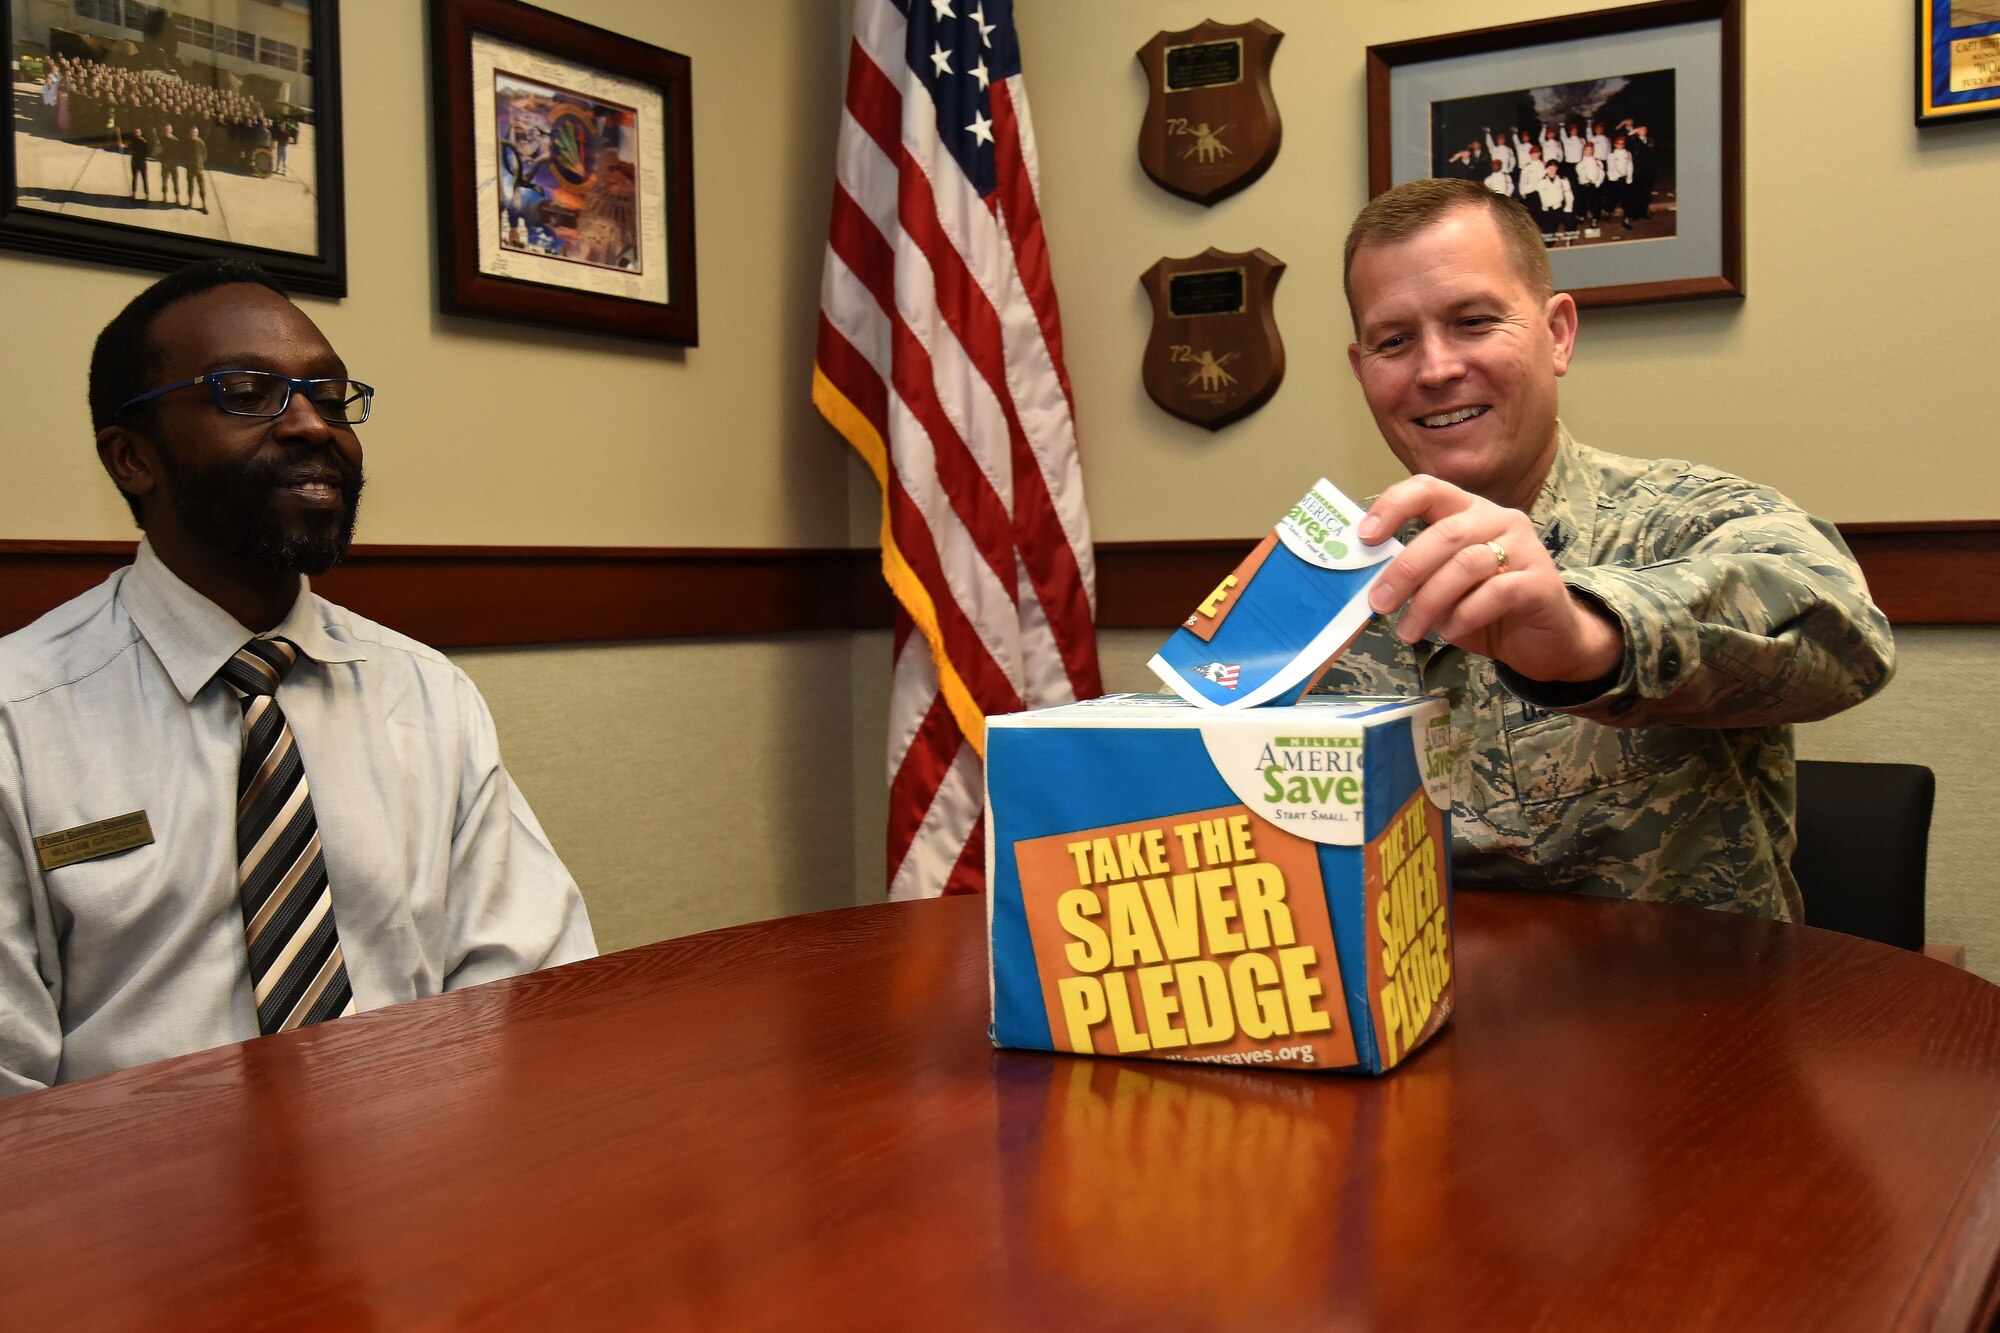 Financial Readiness manager, William Gathecha watches as U.S. Air Force Col. Jeffrey Sorrell, 17th Training Wing vice commander, folds his pledge slip to go into the saver pledge box at the Norma Brown building on Goodfellow Air Force Base, Texas, on Feb. 23, 2018. This box is one of several ways individuals can commit to a savings plan in addition to attending classes the Airman and Family Readiness Center will be hosting Feb. 26 through March 3. (U.S. Air Force photo by Airman 1st Class Seraiah Hines/Released)